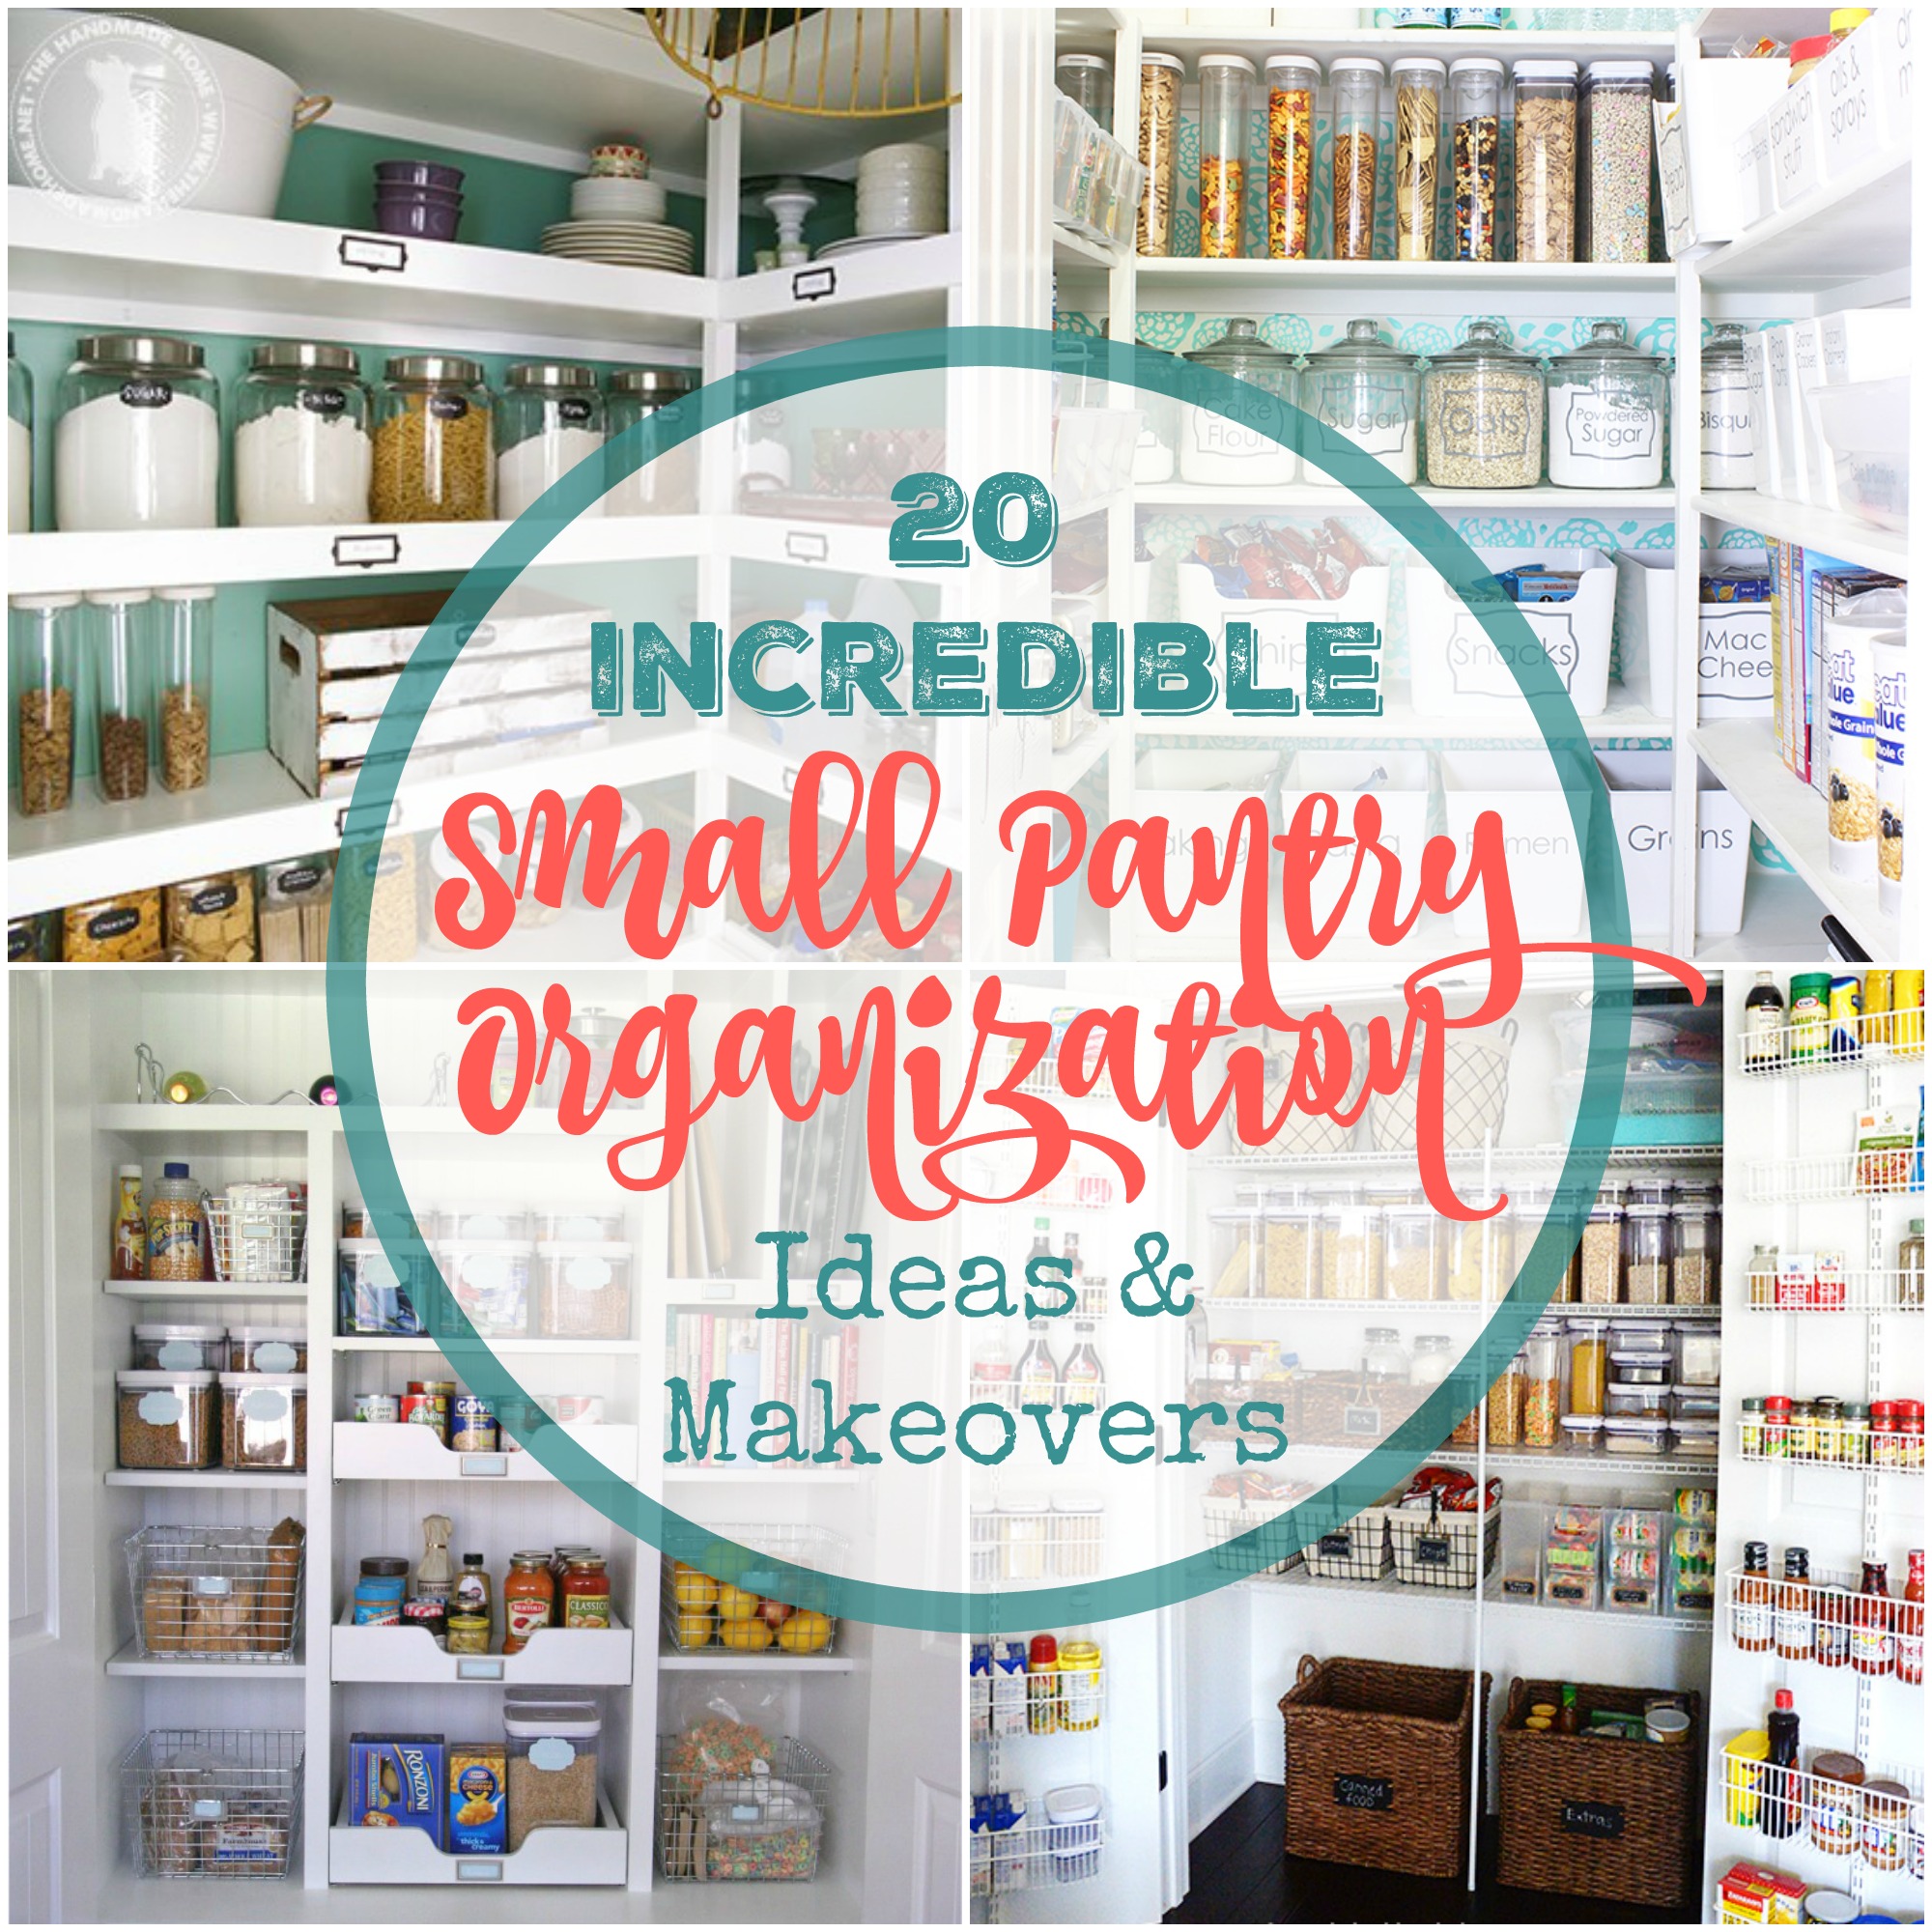 https://www.thehappyhousie.com/wp-content/uploads/2016/01/20-Incredible-and-Inspiring-Small-Pantry-Organization-Ideas-and-Makeovers-at-thehappyhousie.com_.jpg